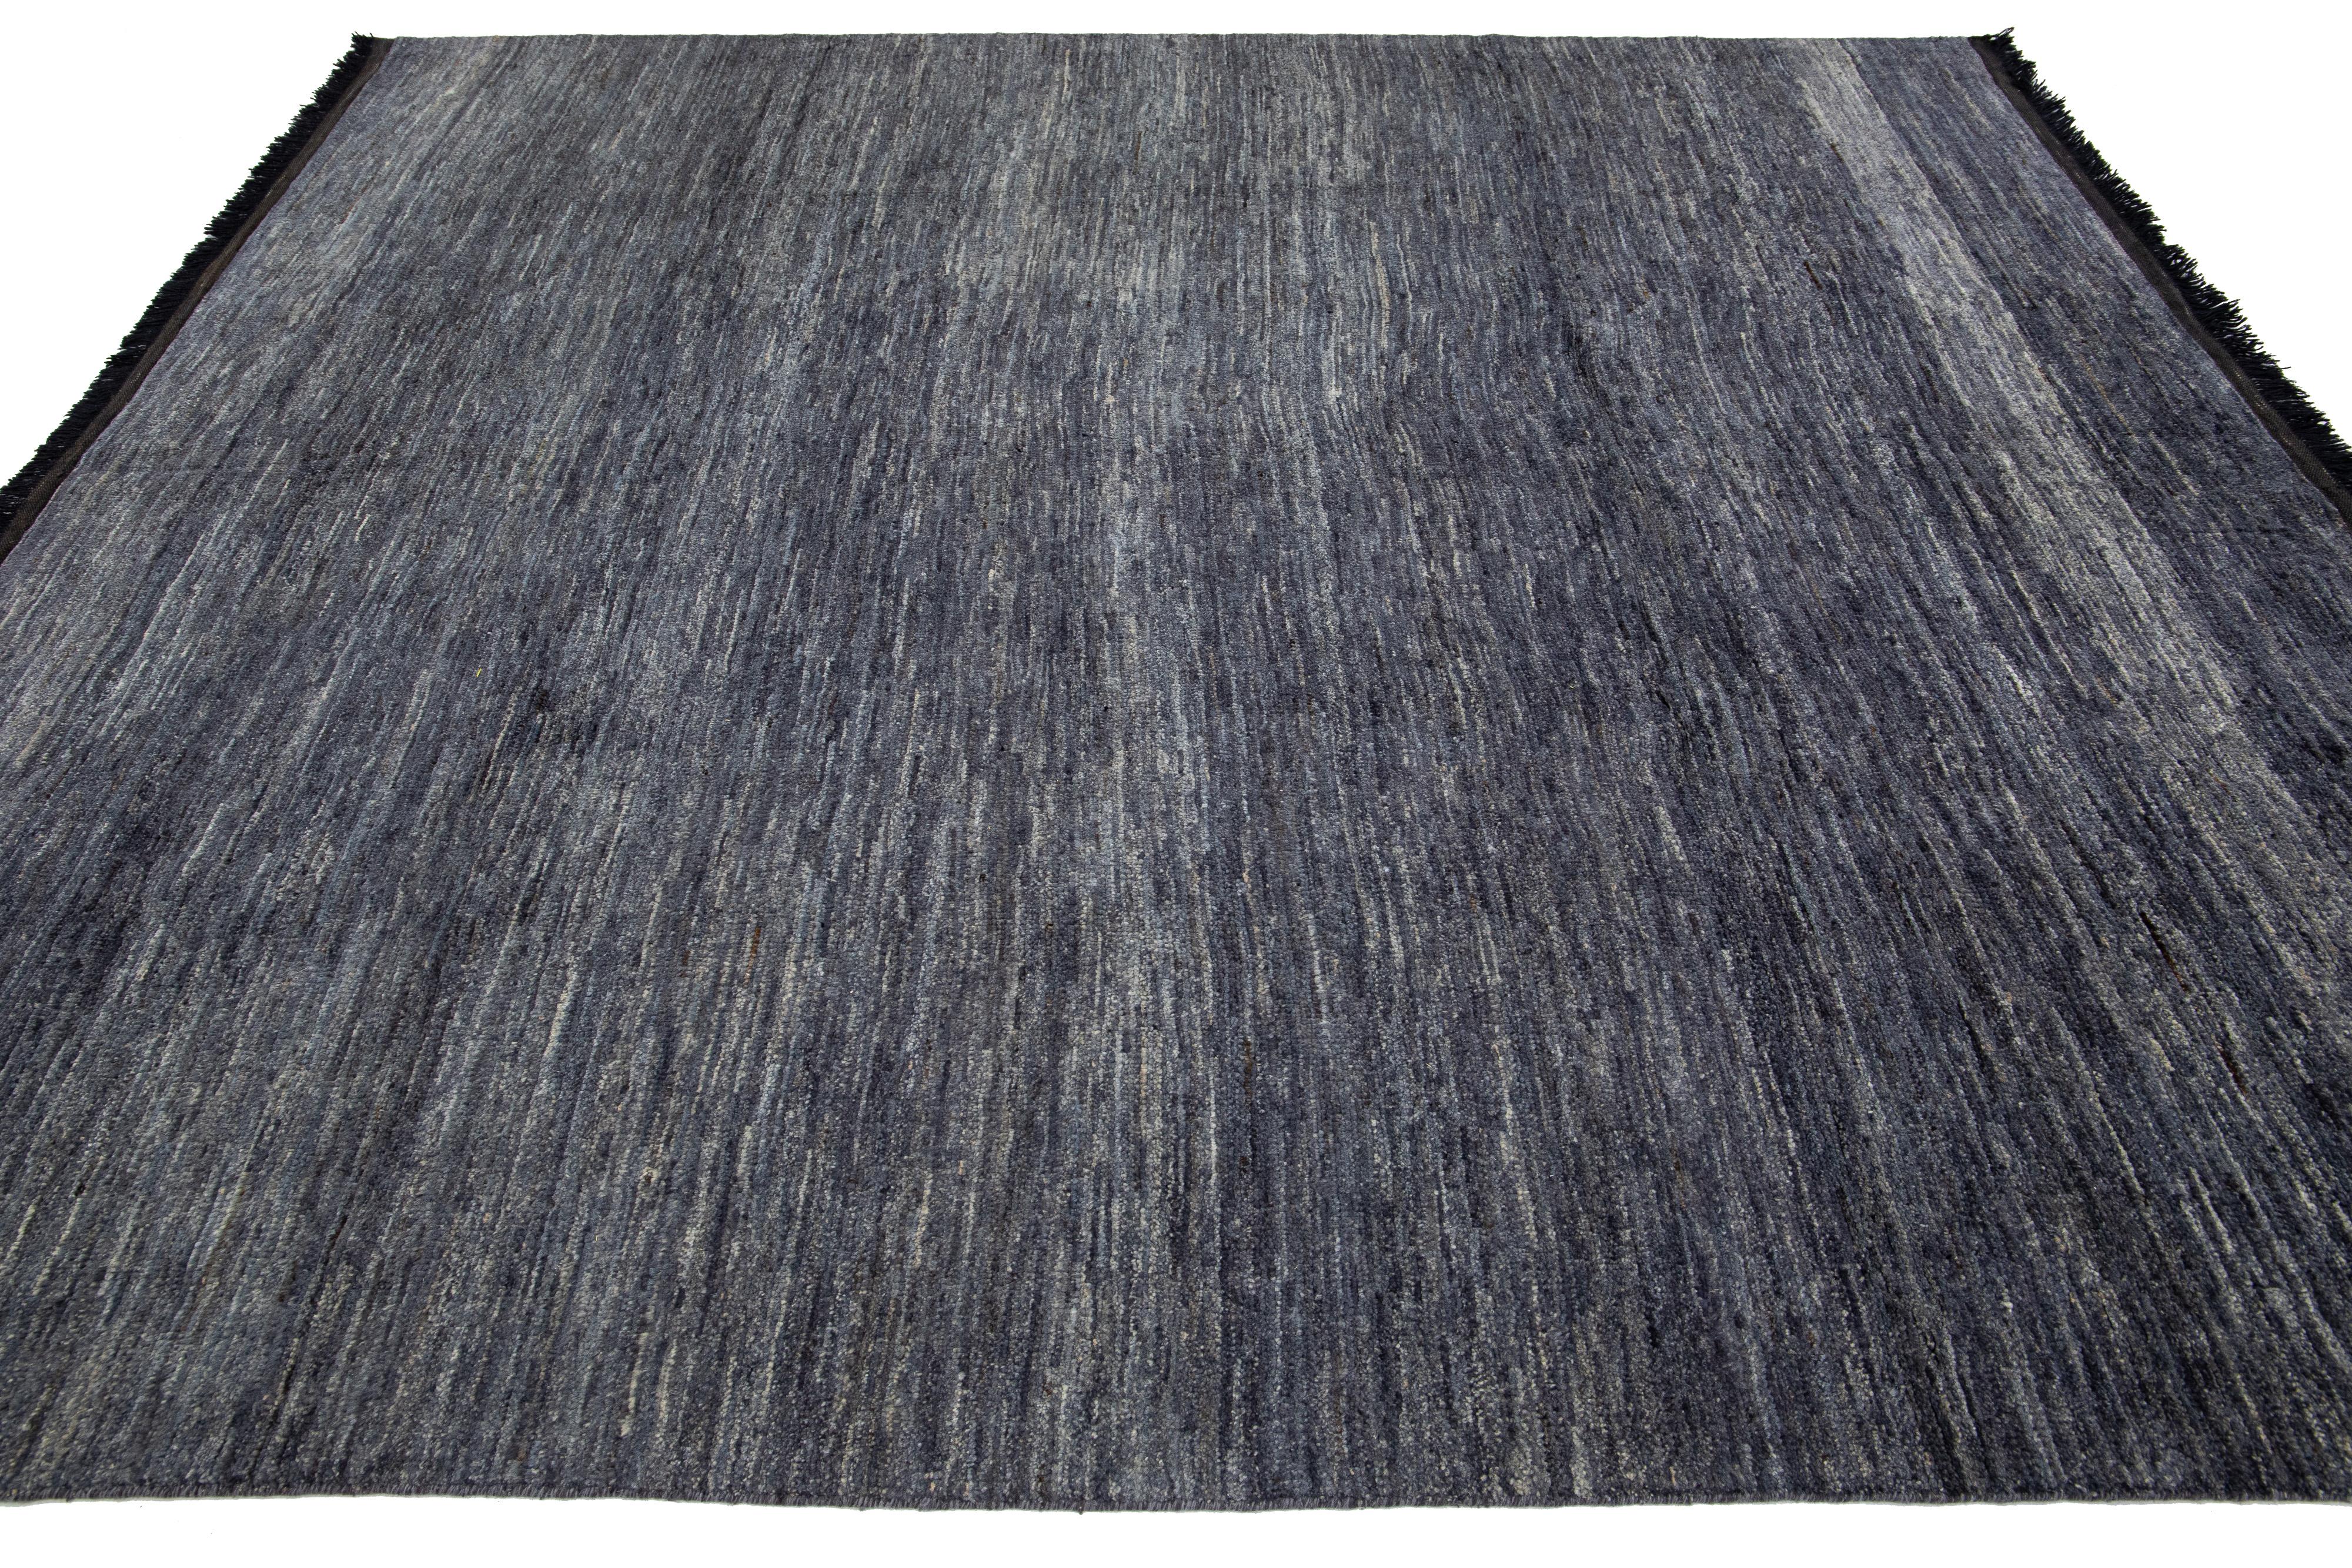 Hand-Woven Handmade Contemporary Solid Gabbeh Style Wool Rug In Gray-Charcoal Color For Sale